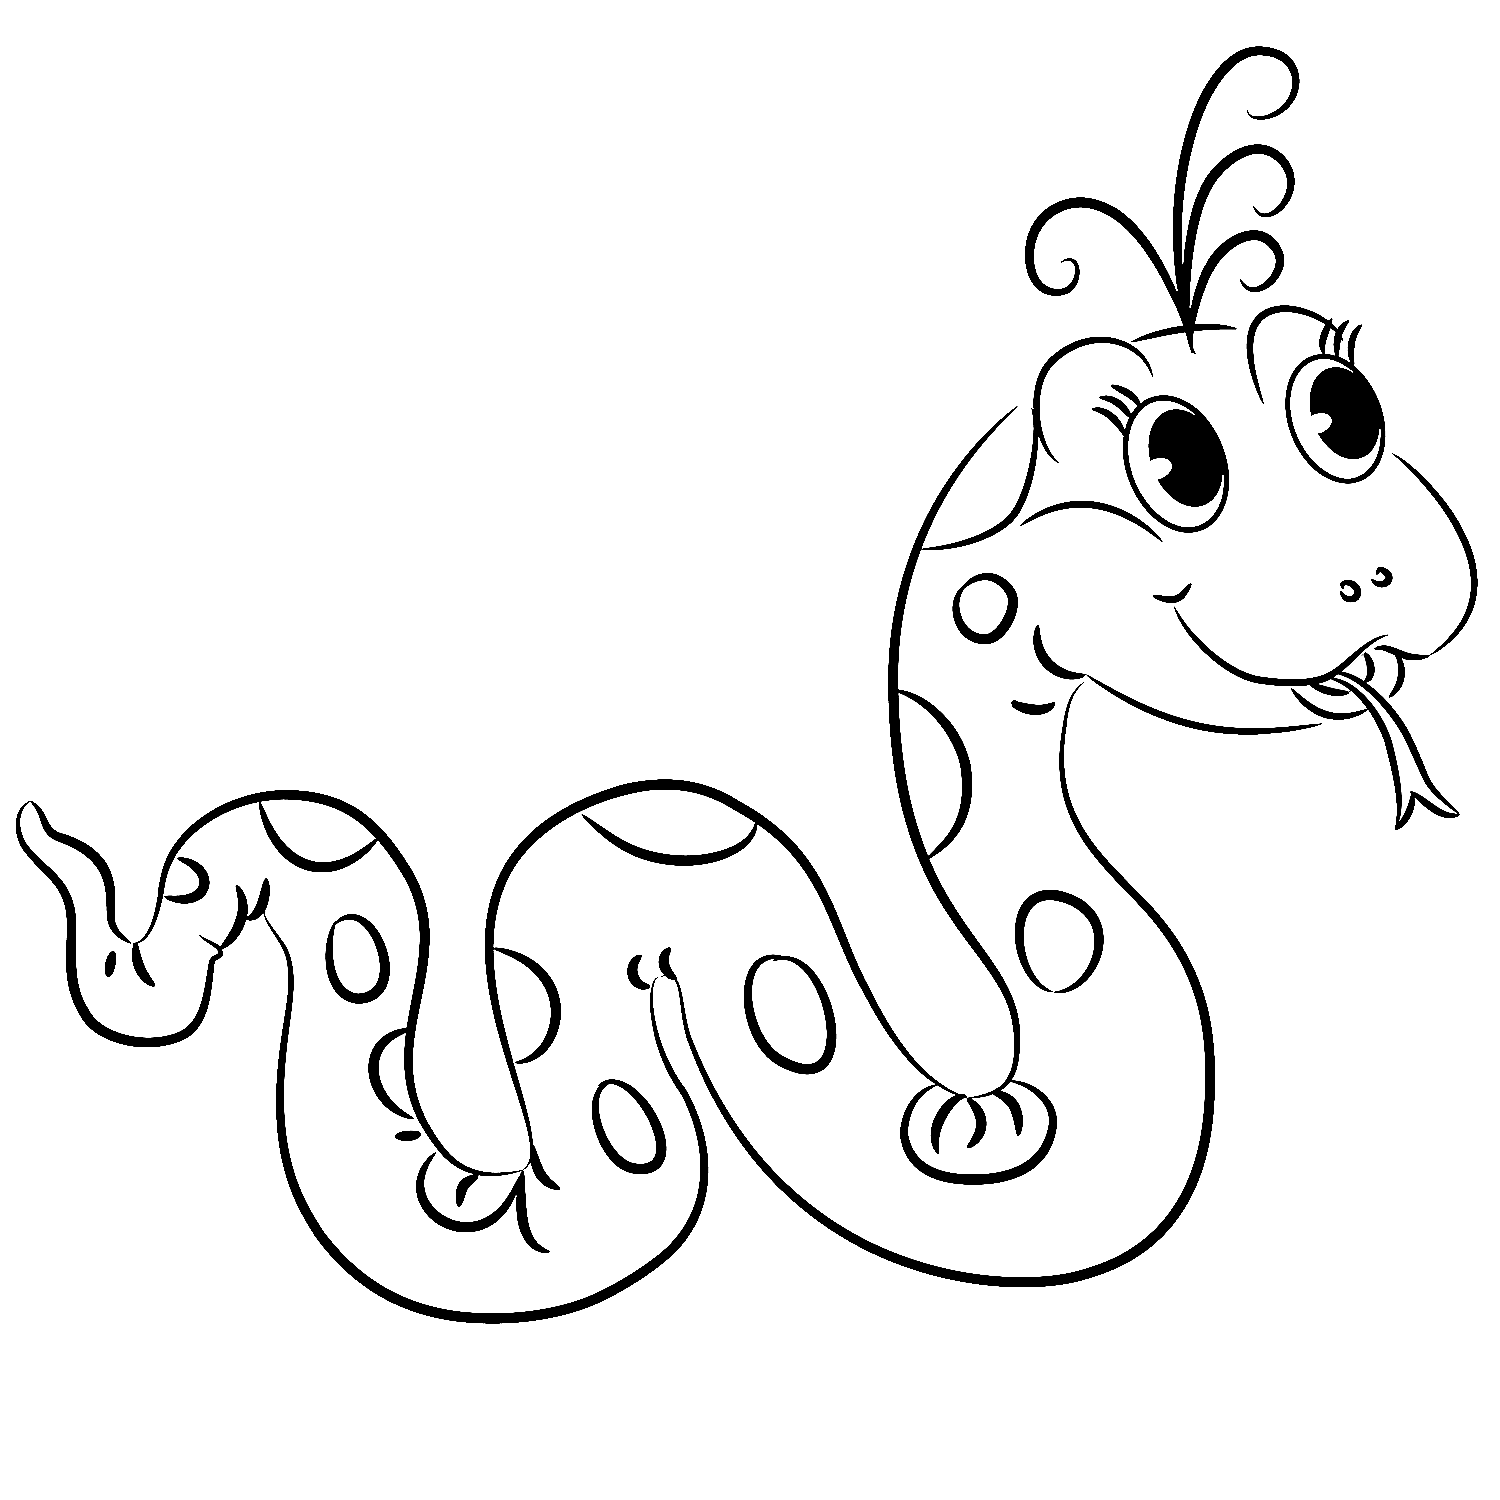 snakes colouring pages whats your chinese animal sign the lady with no luck snakes colouring pages 